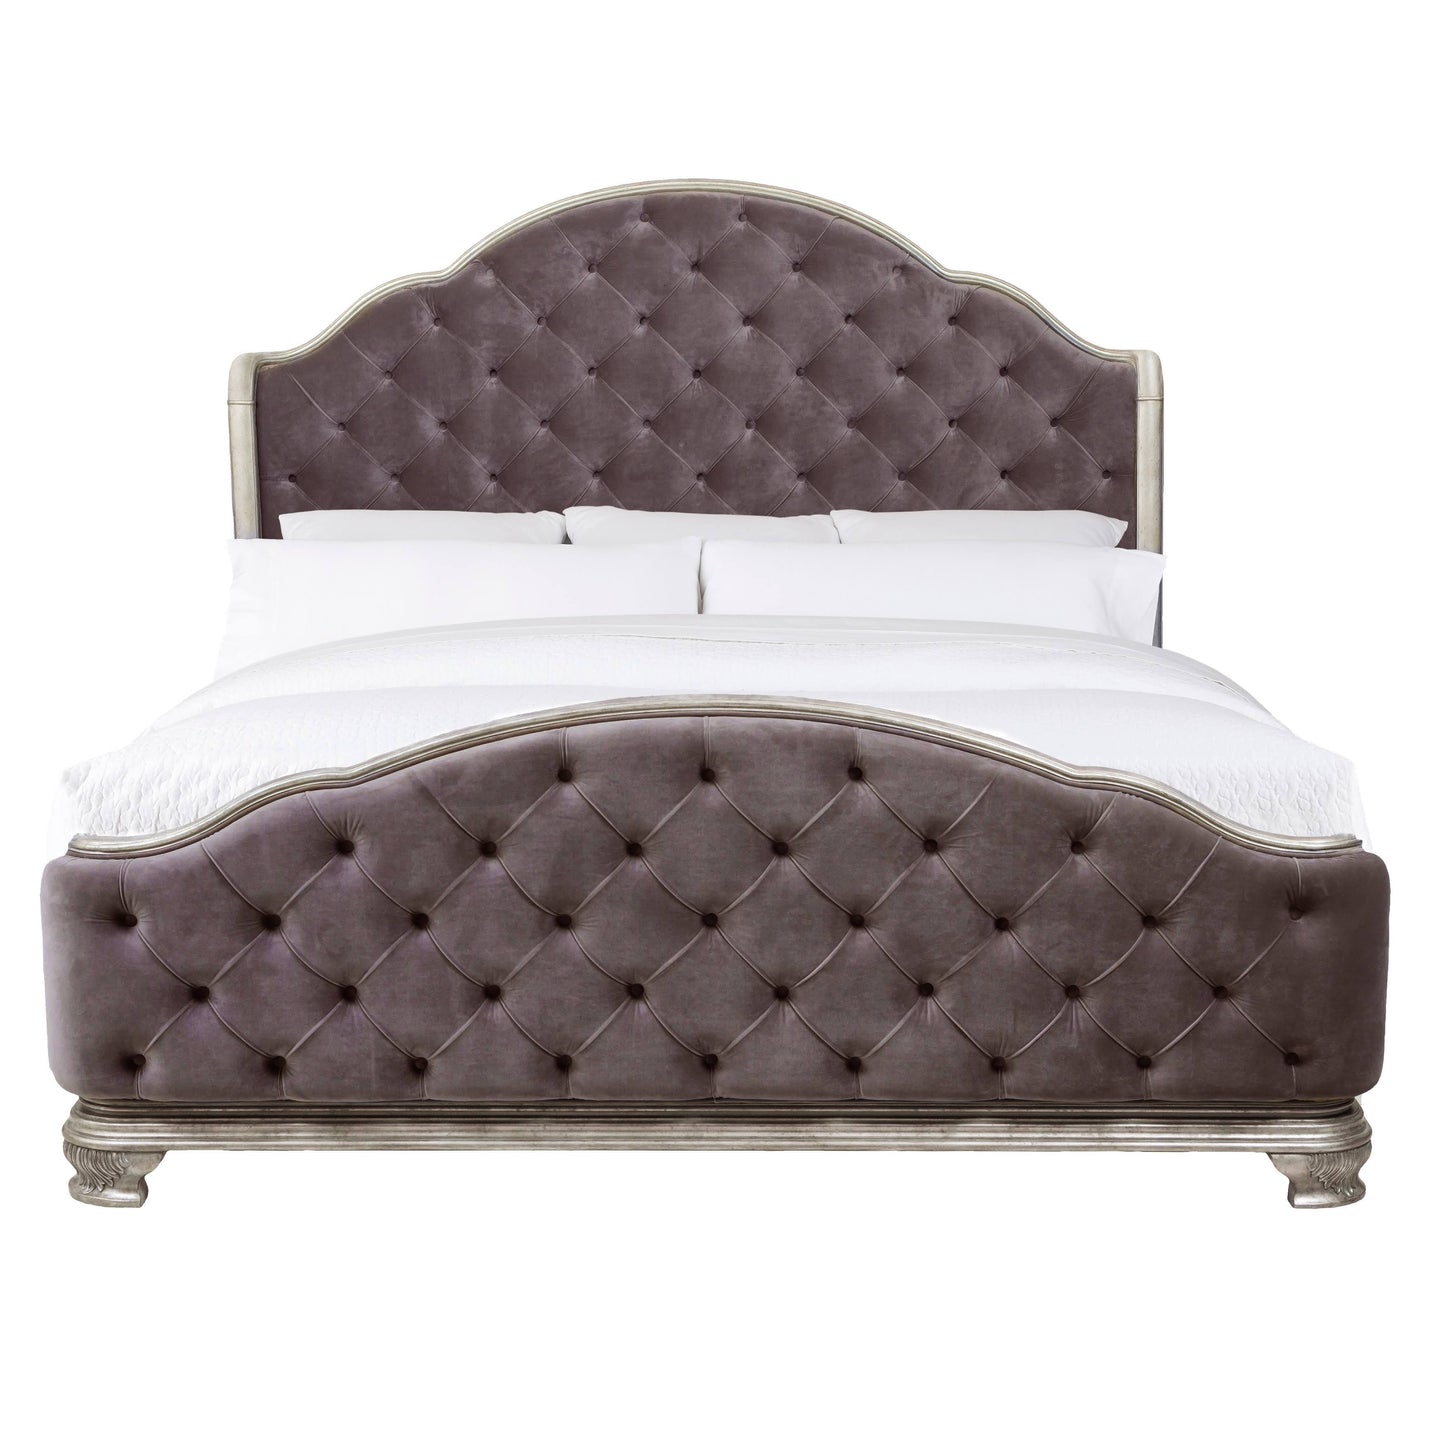 Furniture Rhianna Upholstered Bed, Queen